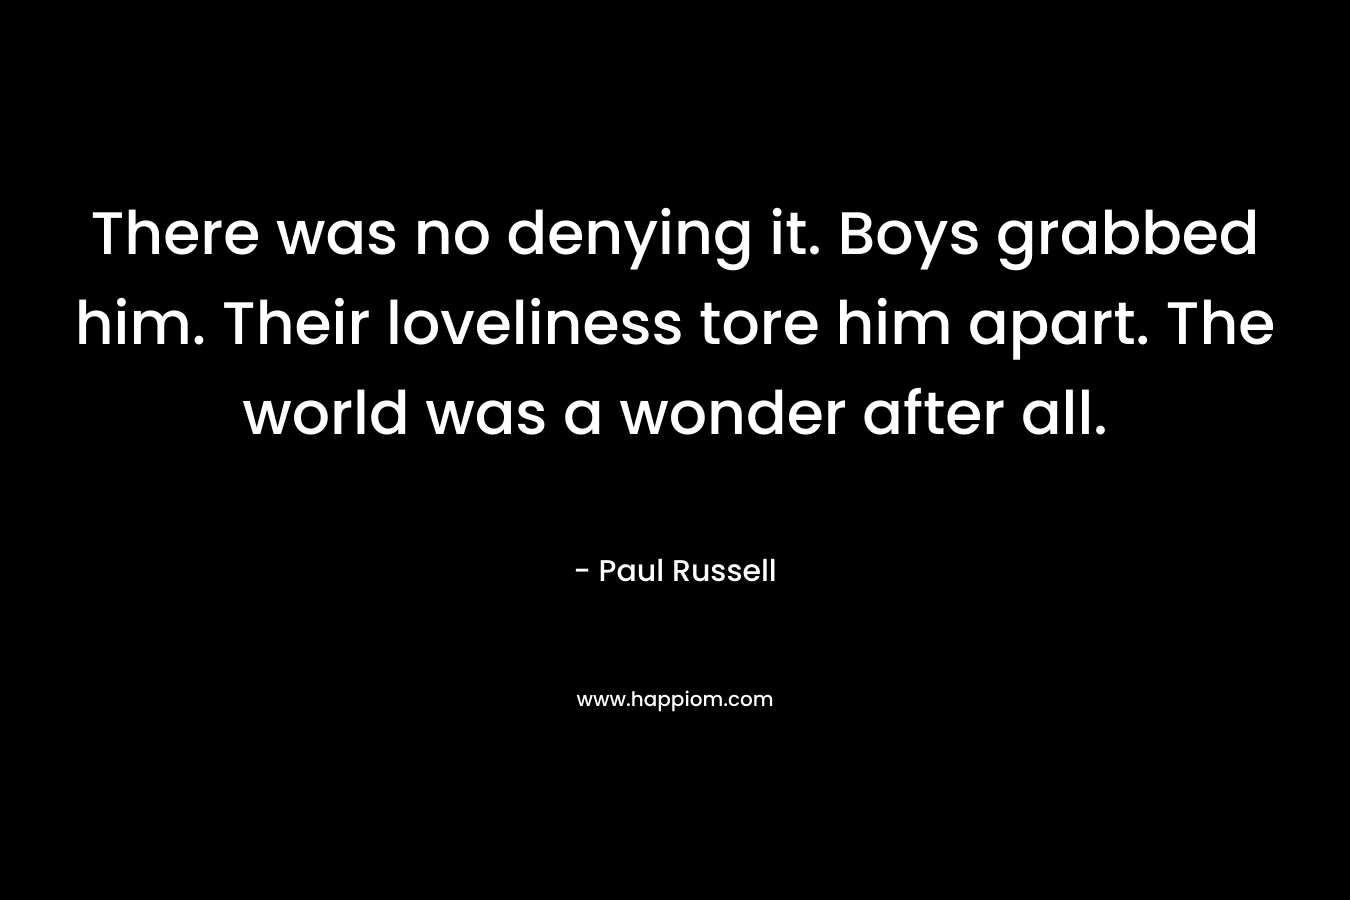 There was no denying it. Boys grabbed him. Their loveliness tore him apart. The world was a wonder after all. – Paul Russell